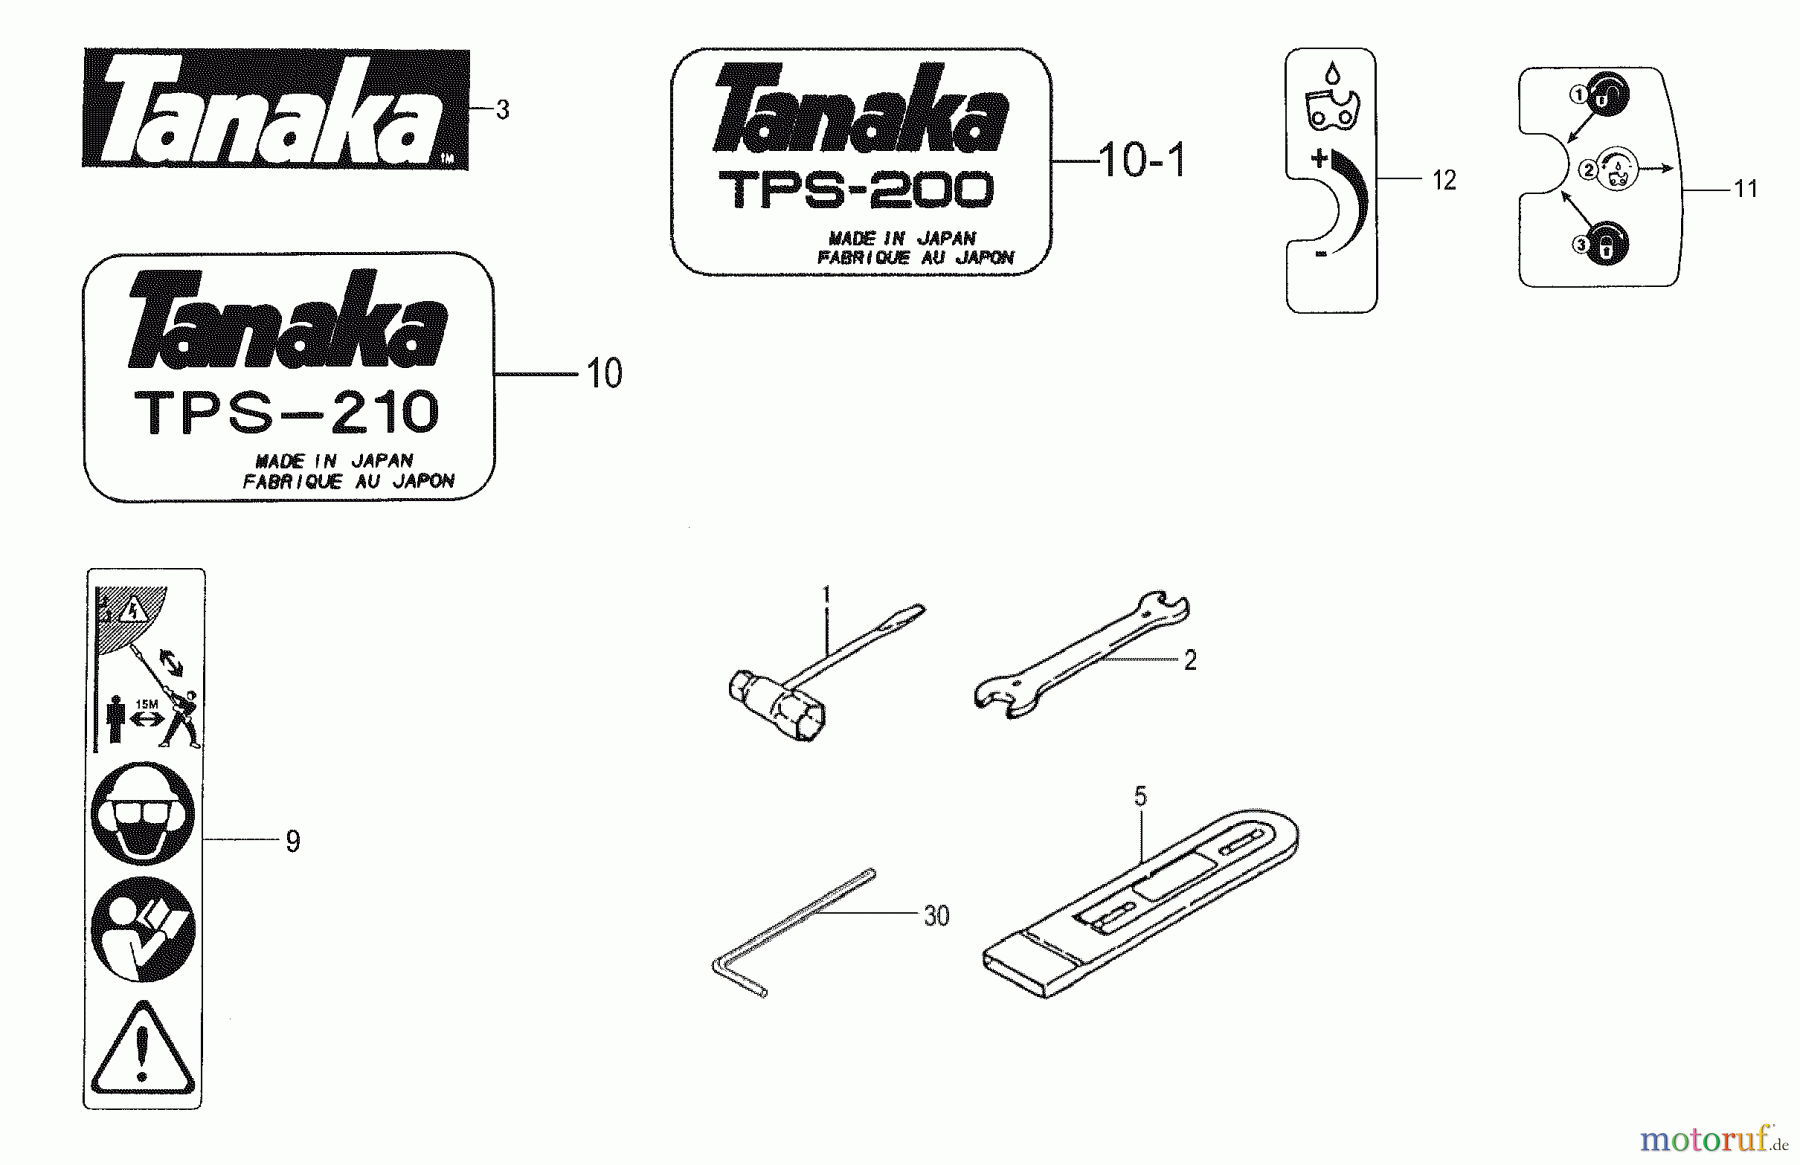  Tanaka Hochentaster TPS-260PF - Tanaka Extended Reach Pole Saw Tools & Decals